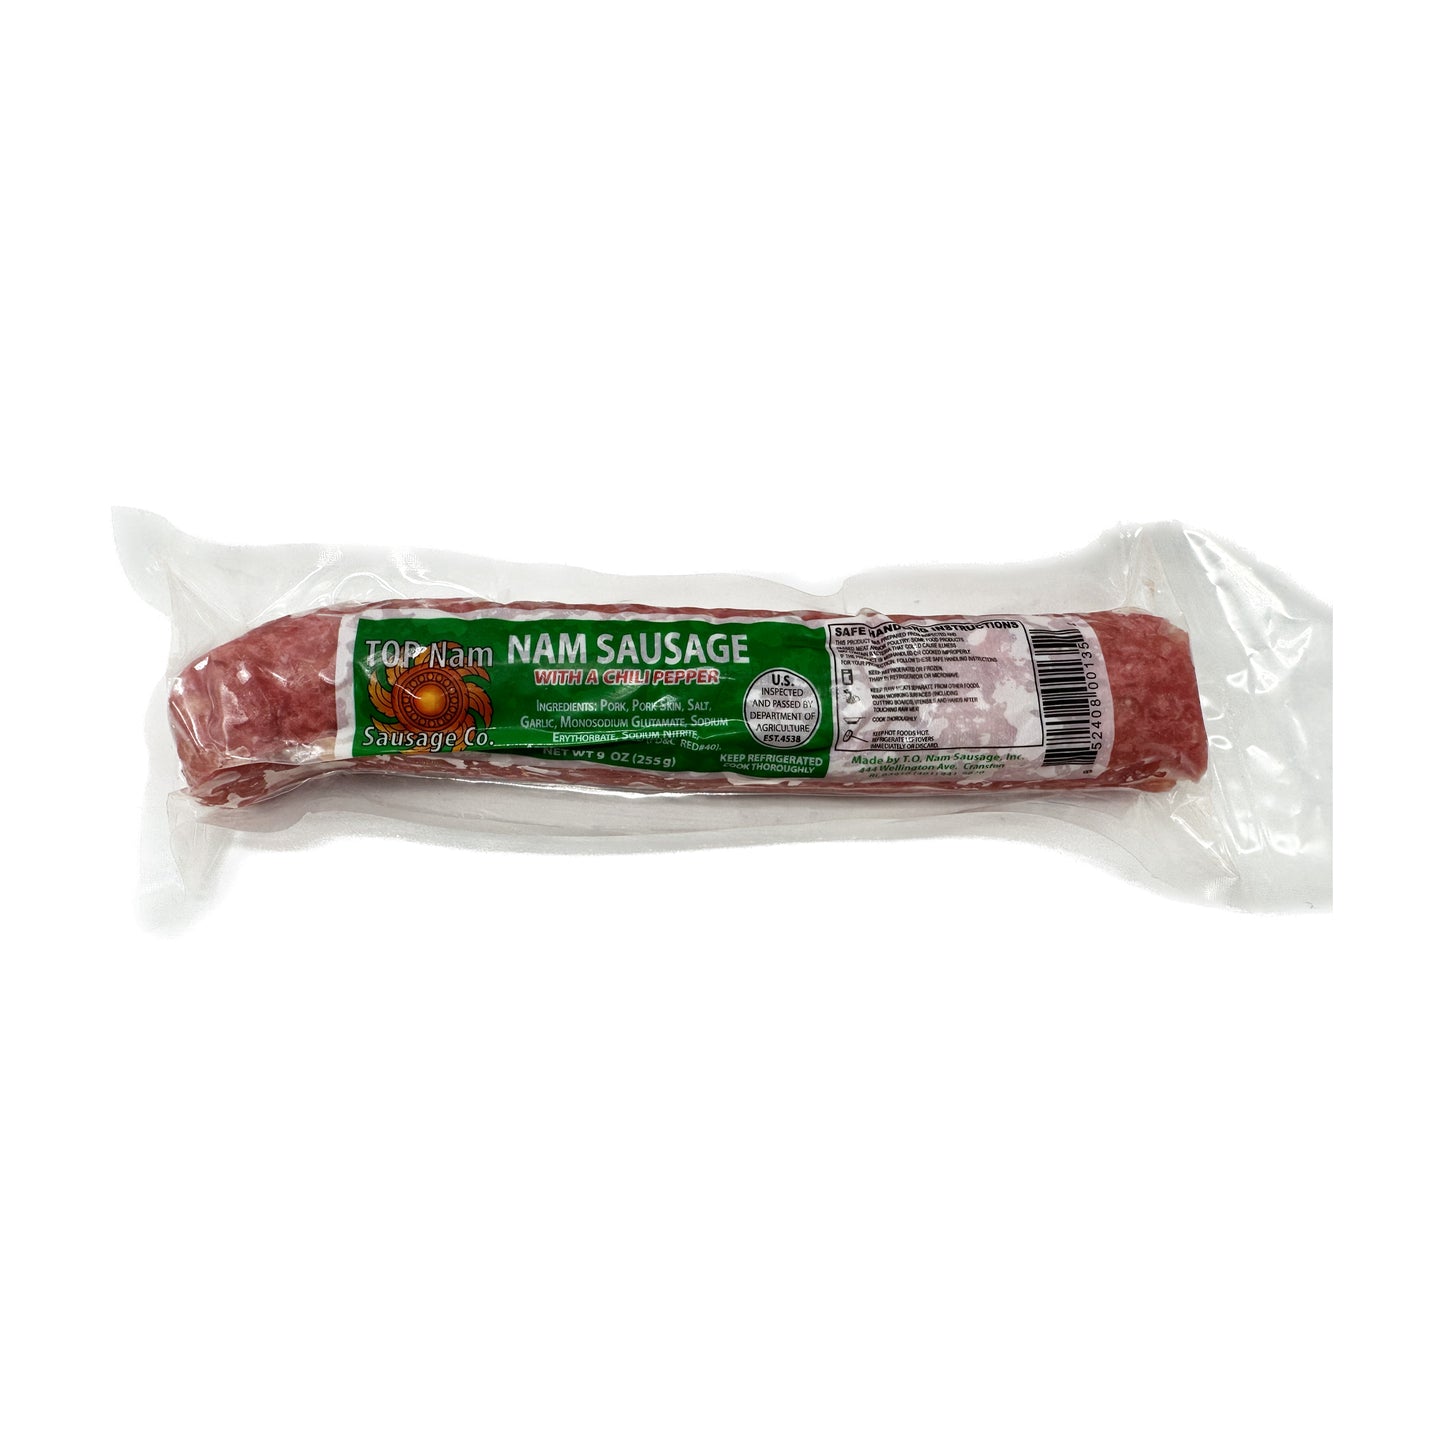 Nam Sausage with Chilipepper - 9 oz